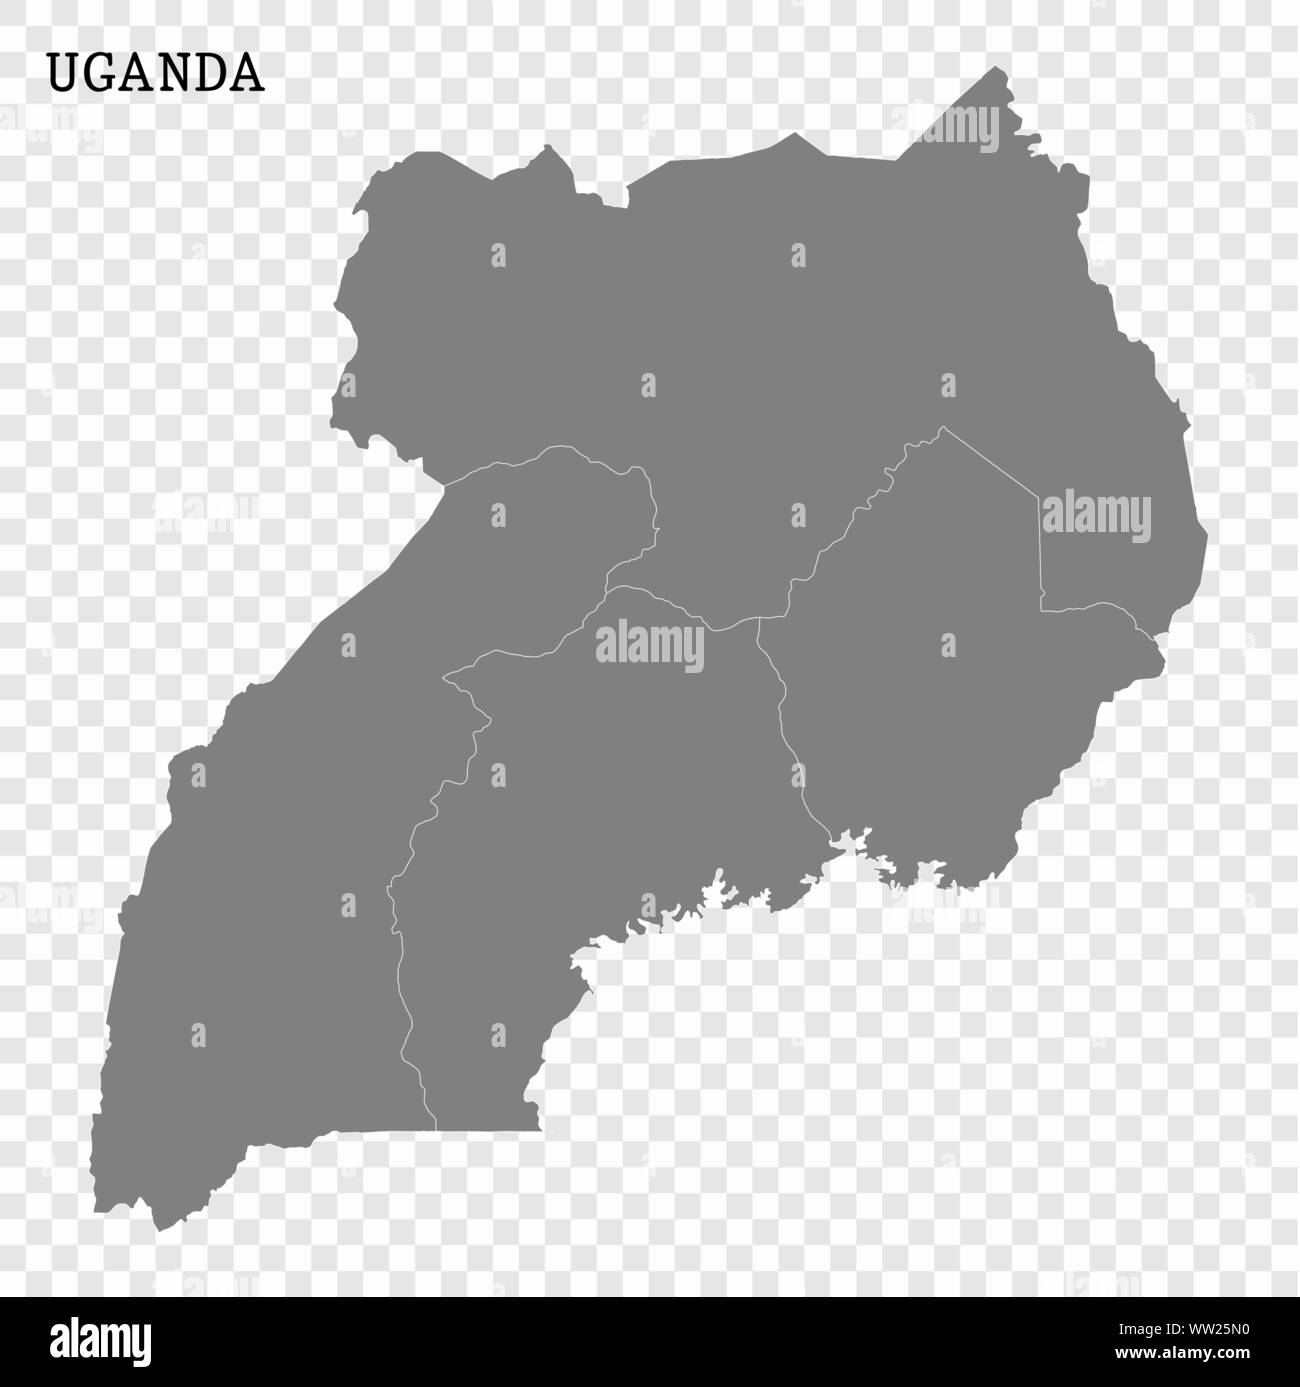 High quality map of Uganda with borders of the regions Stock Vector